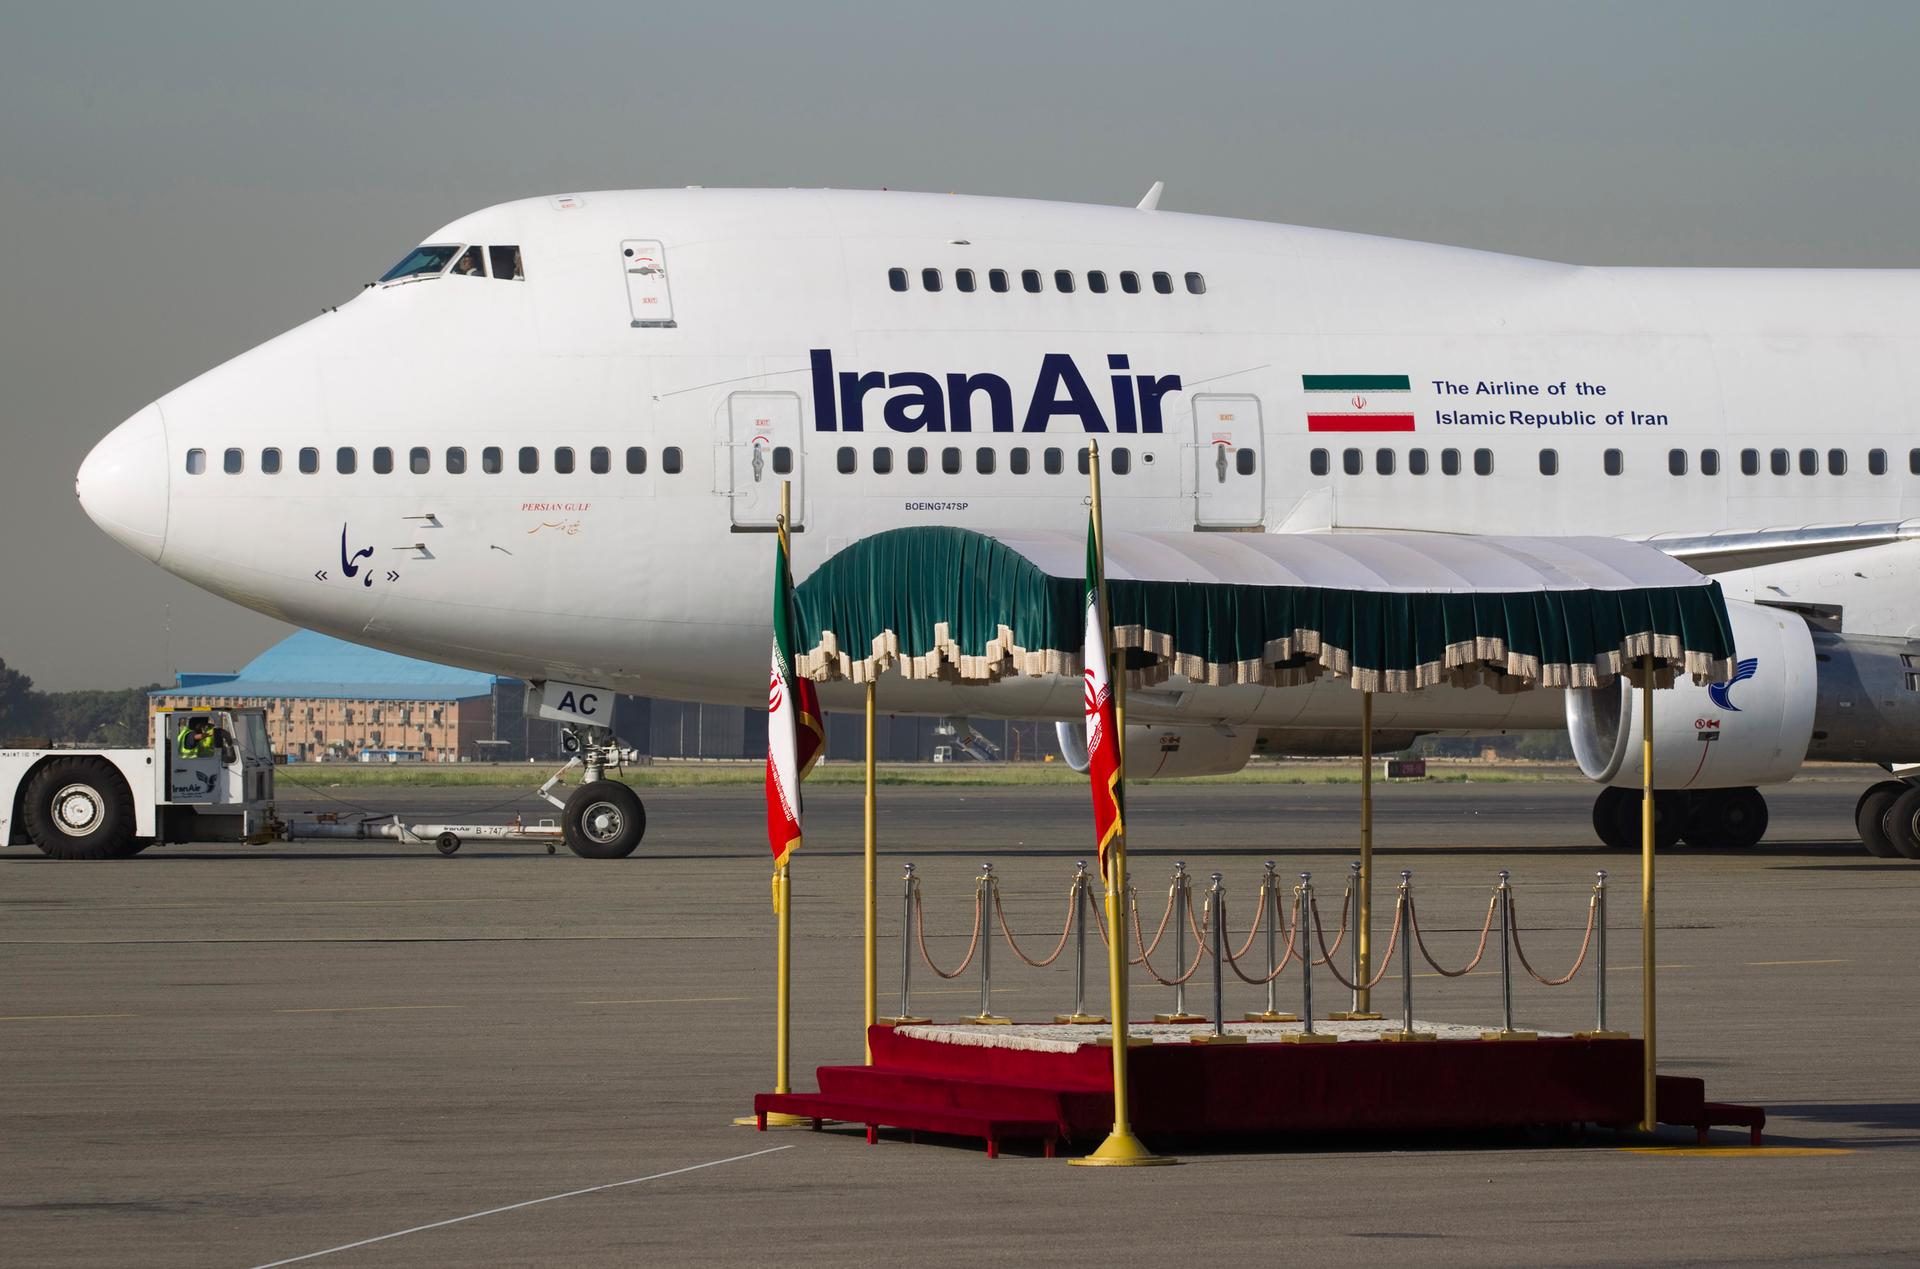 A IranAir Boeing 747SP aircraft is pictured before leaving Tehran's Mehrabad airport September 19, 2011.